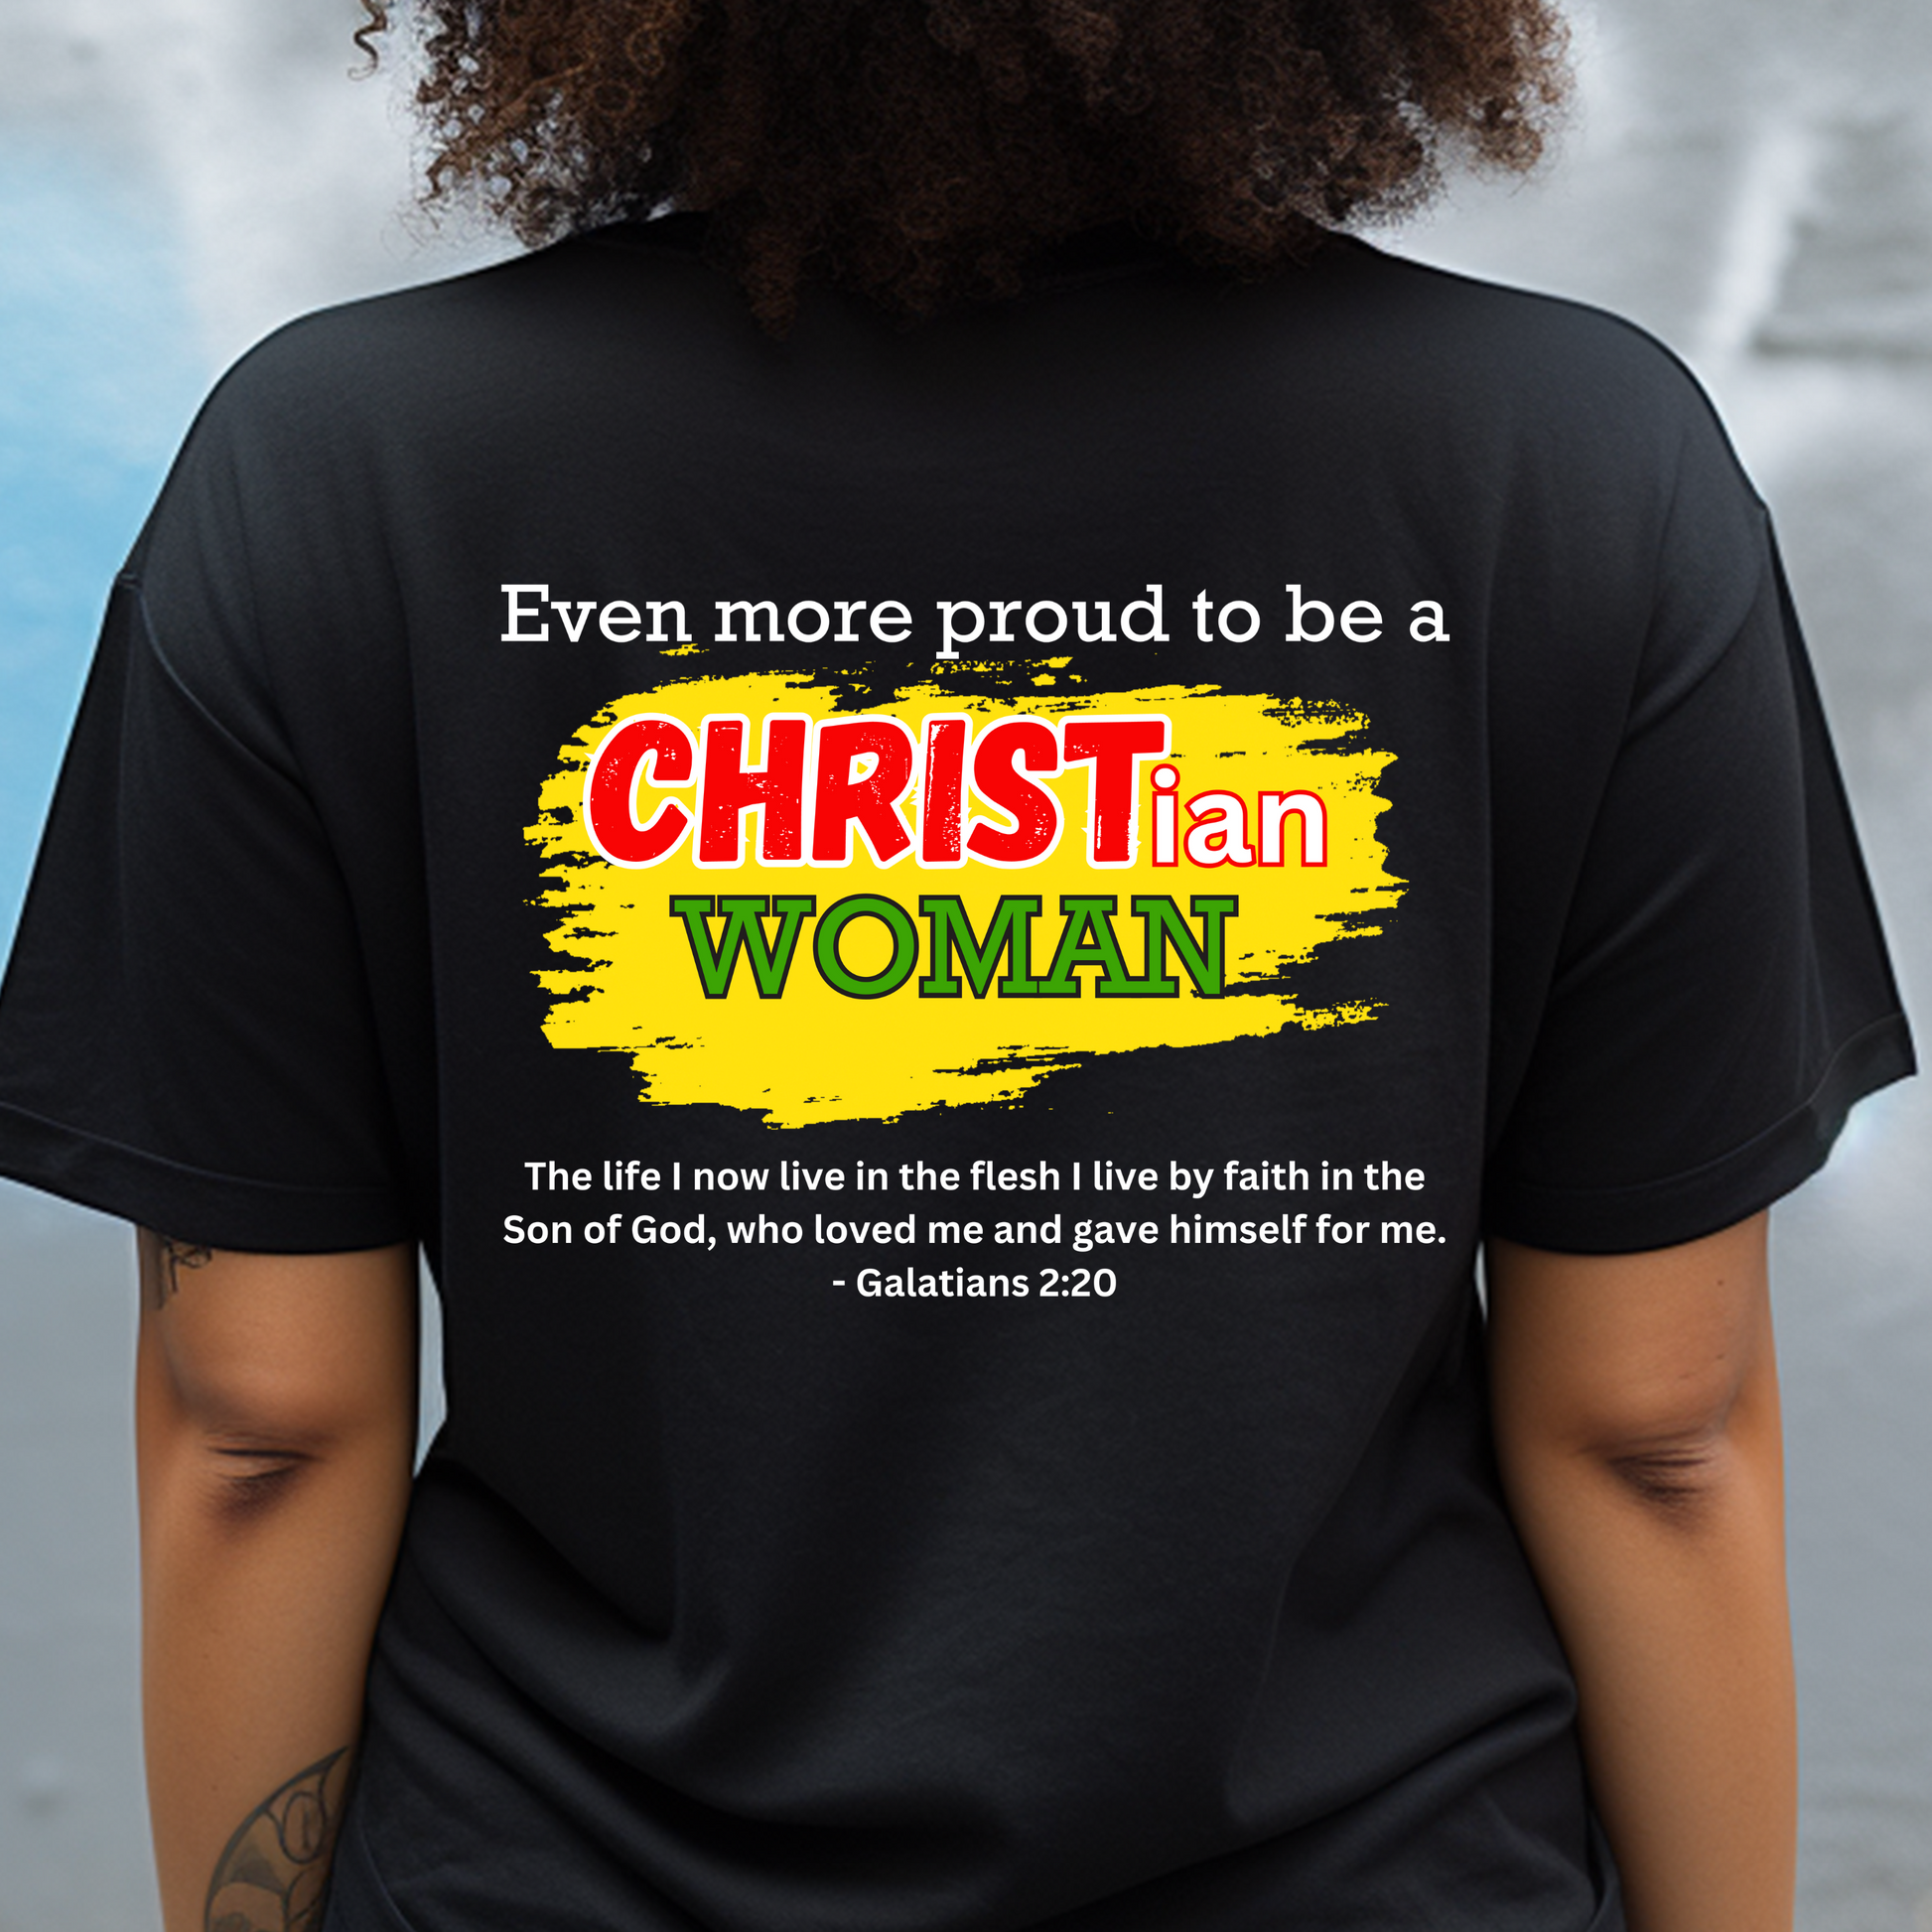 Introducing our empowering "Proud to be a Black Christian Woman" t-shirt. This stylish black tee commemorates Black History and faith, making it the perfect choice for those who want to make a bold statement. 🖤✝️ #BlackChristianWoman #FaithFashion #BlackHistoryFashion